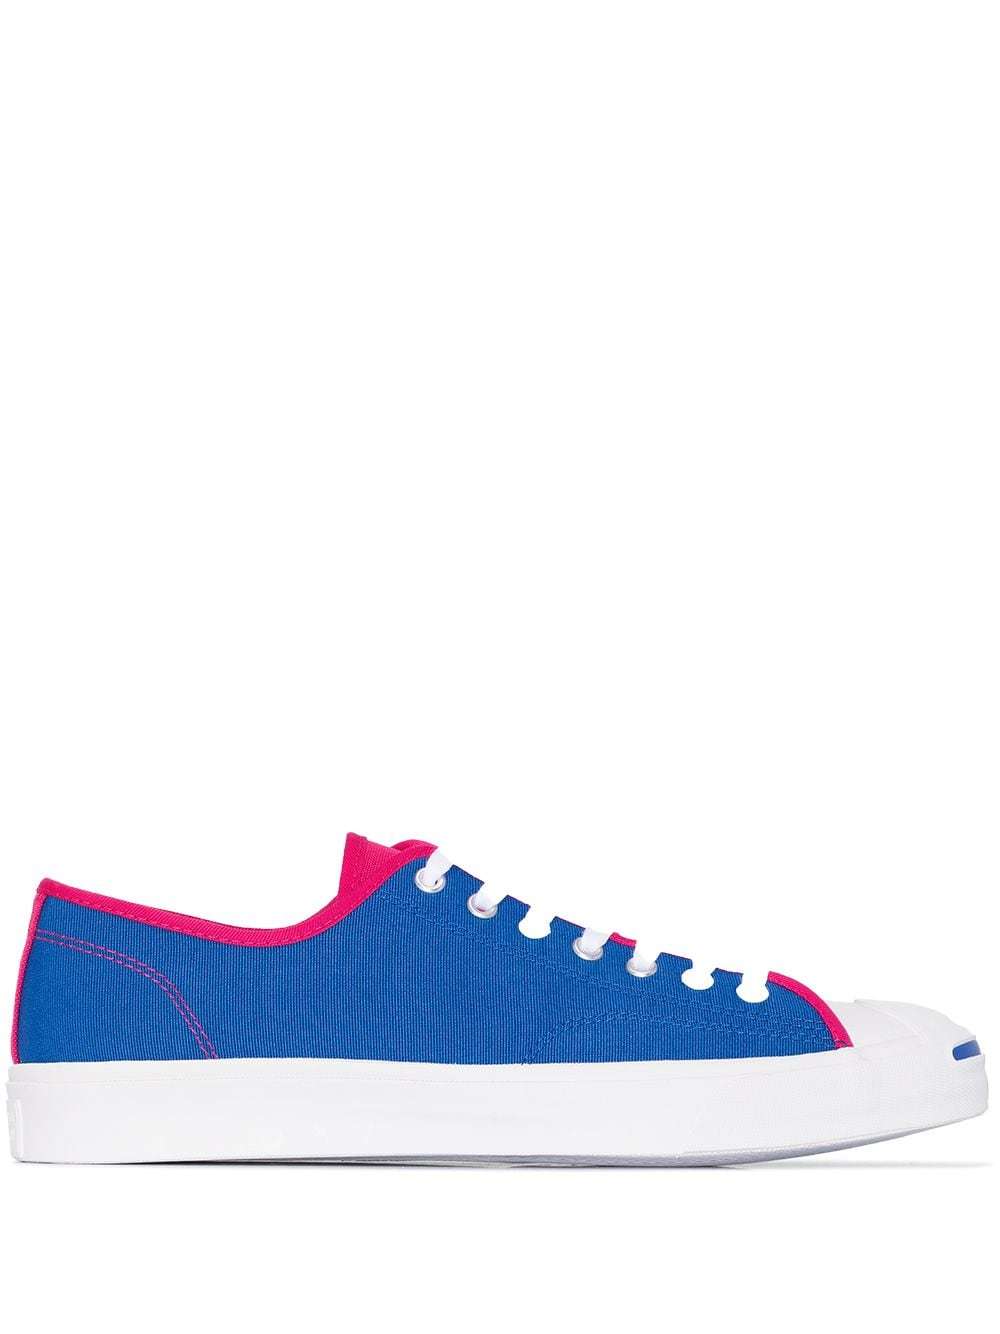 Converse Jack Purcell Canvas Sneakers, $34 | farfetch.com | Lookastic